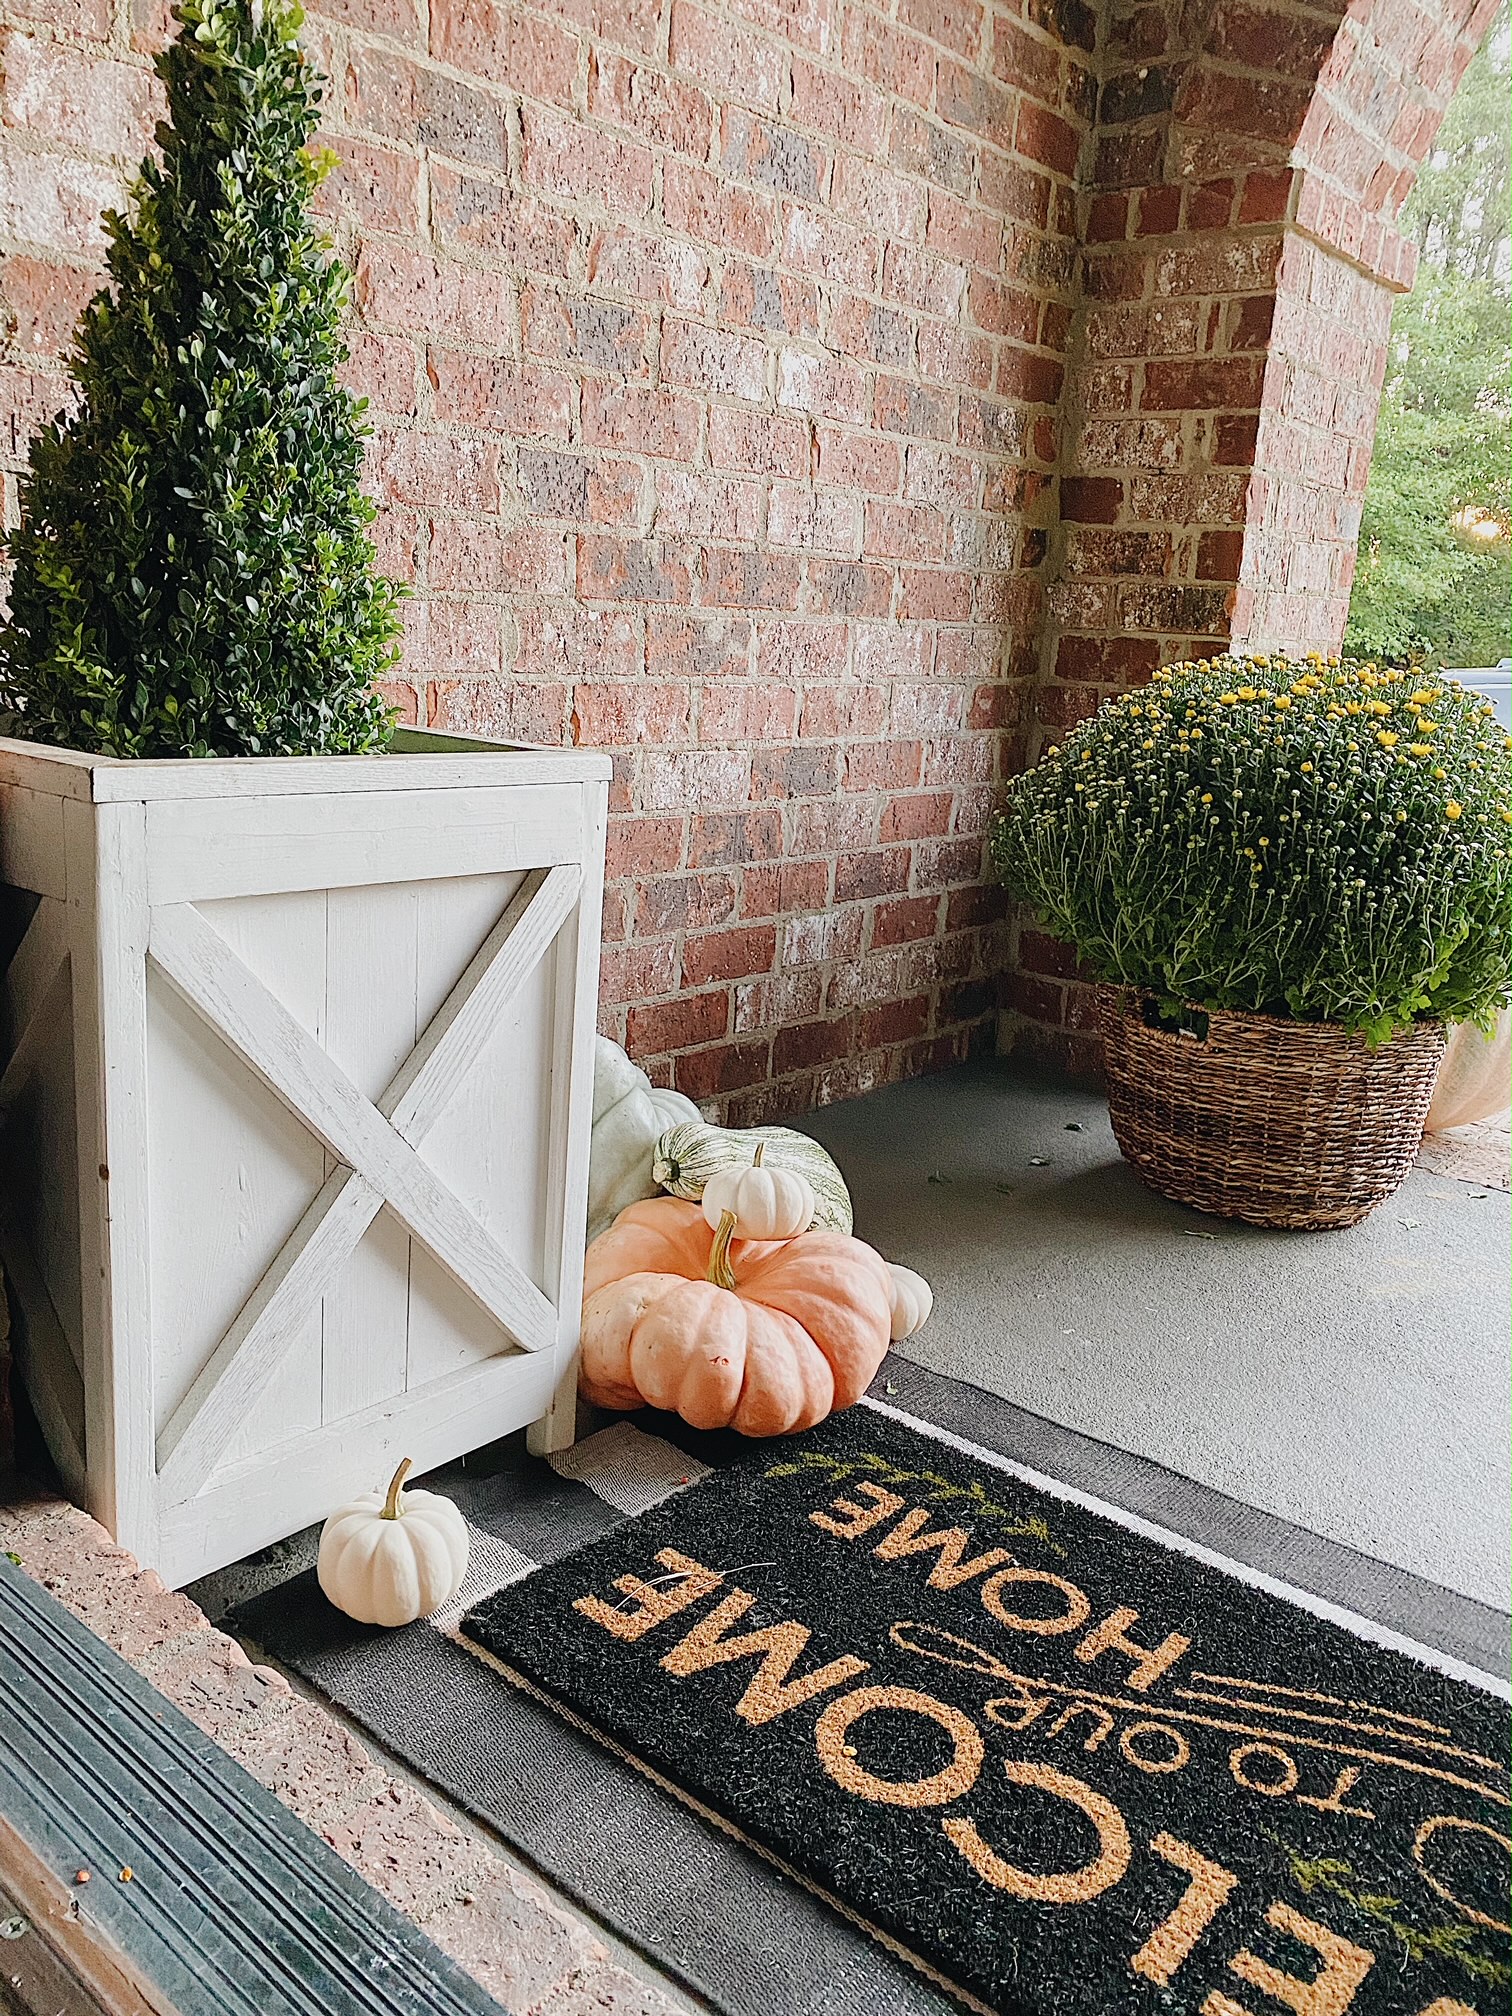 Cozy Outdoor Fall Decor for your Front Porch  featured by top AL home decor blogger, She Gave It A Go